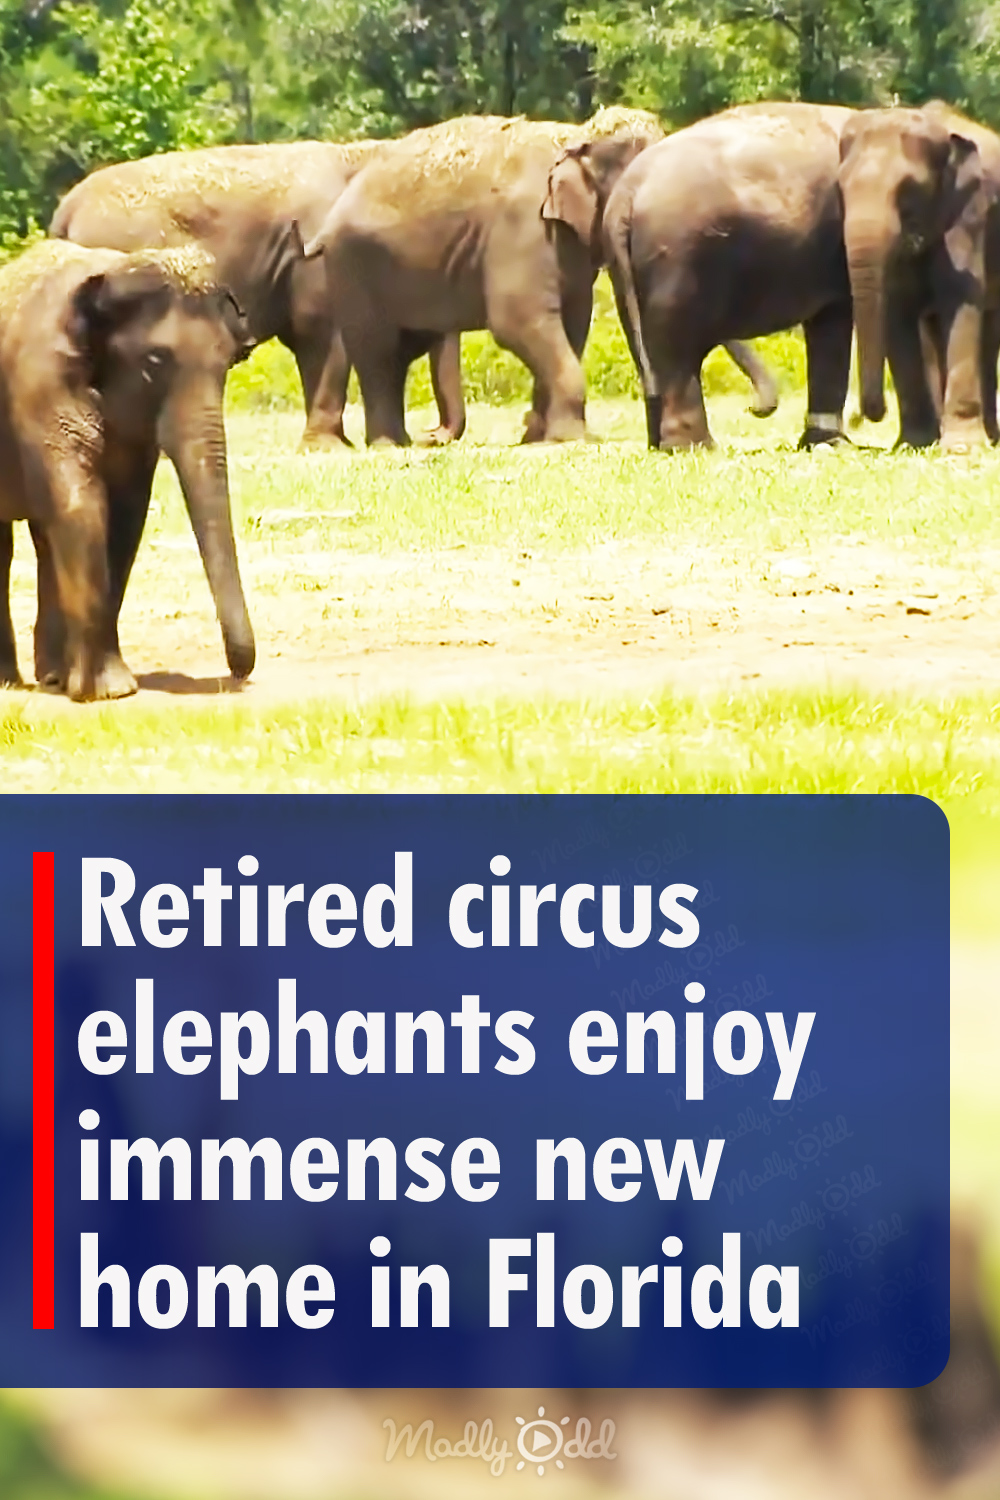 Retired circus elephants enjoy immense new home in Florida